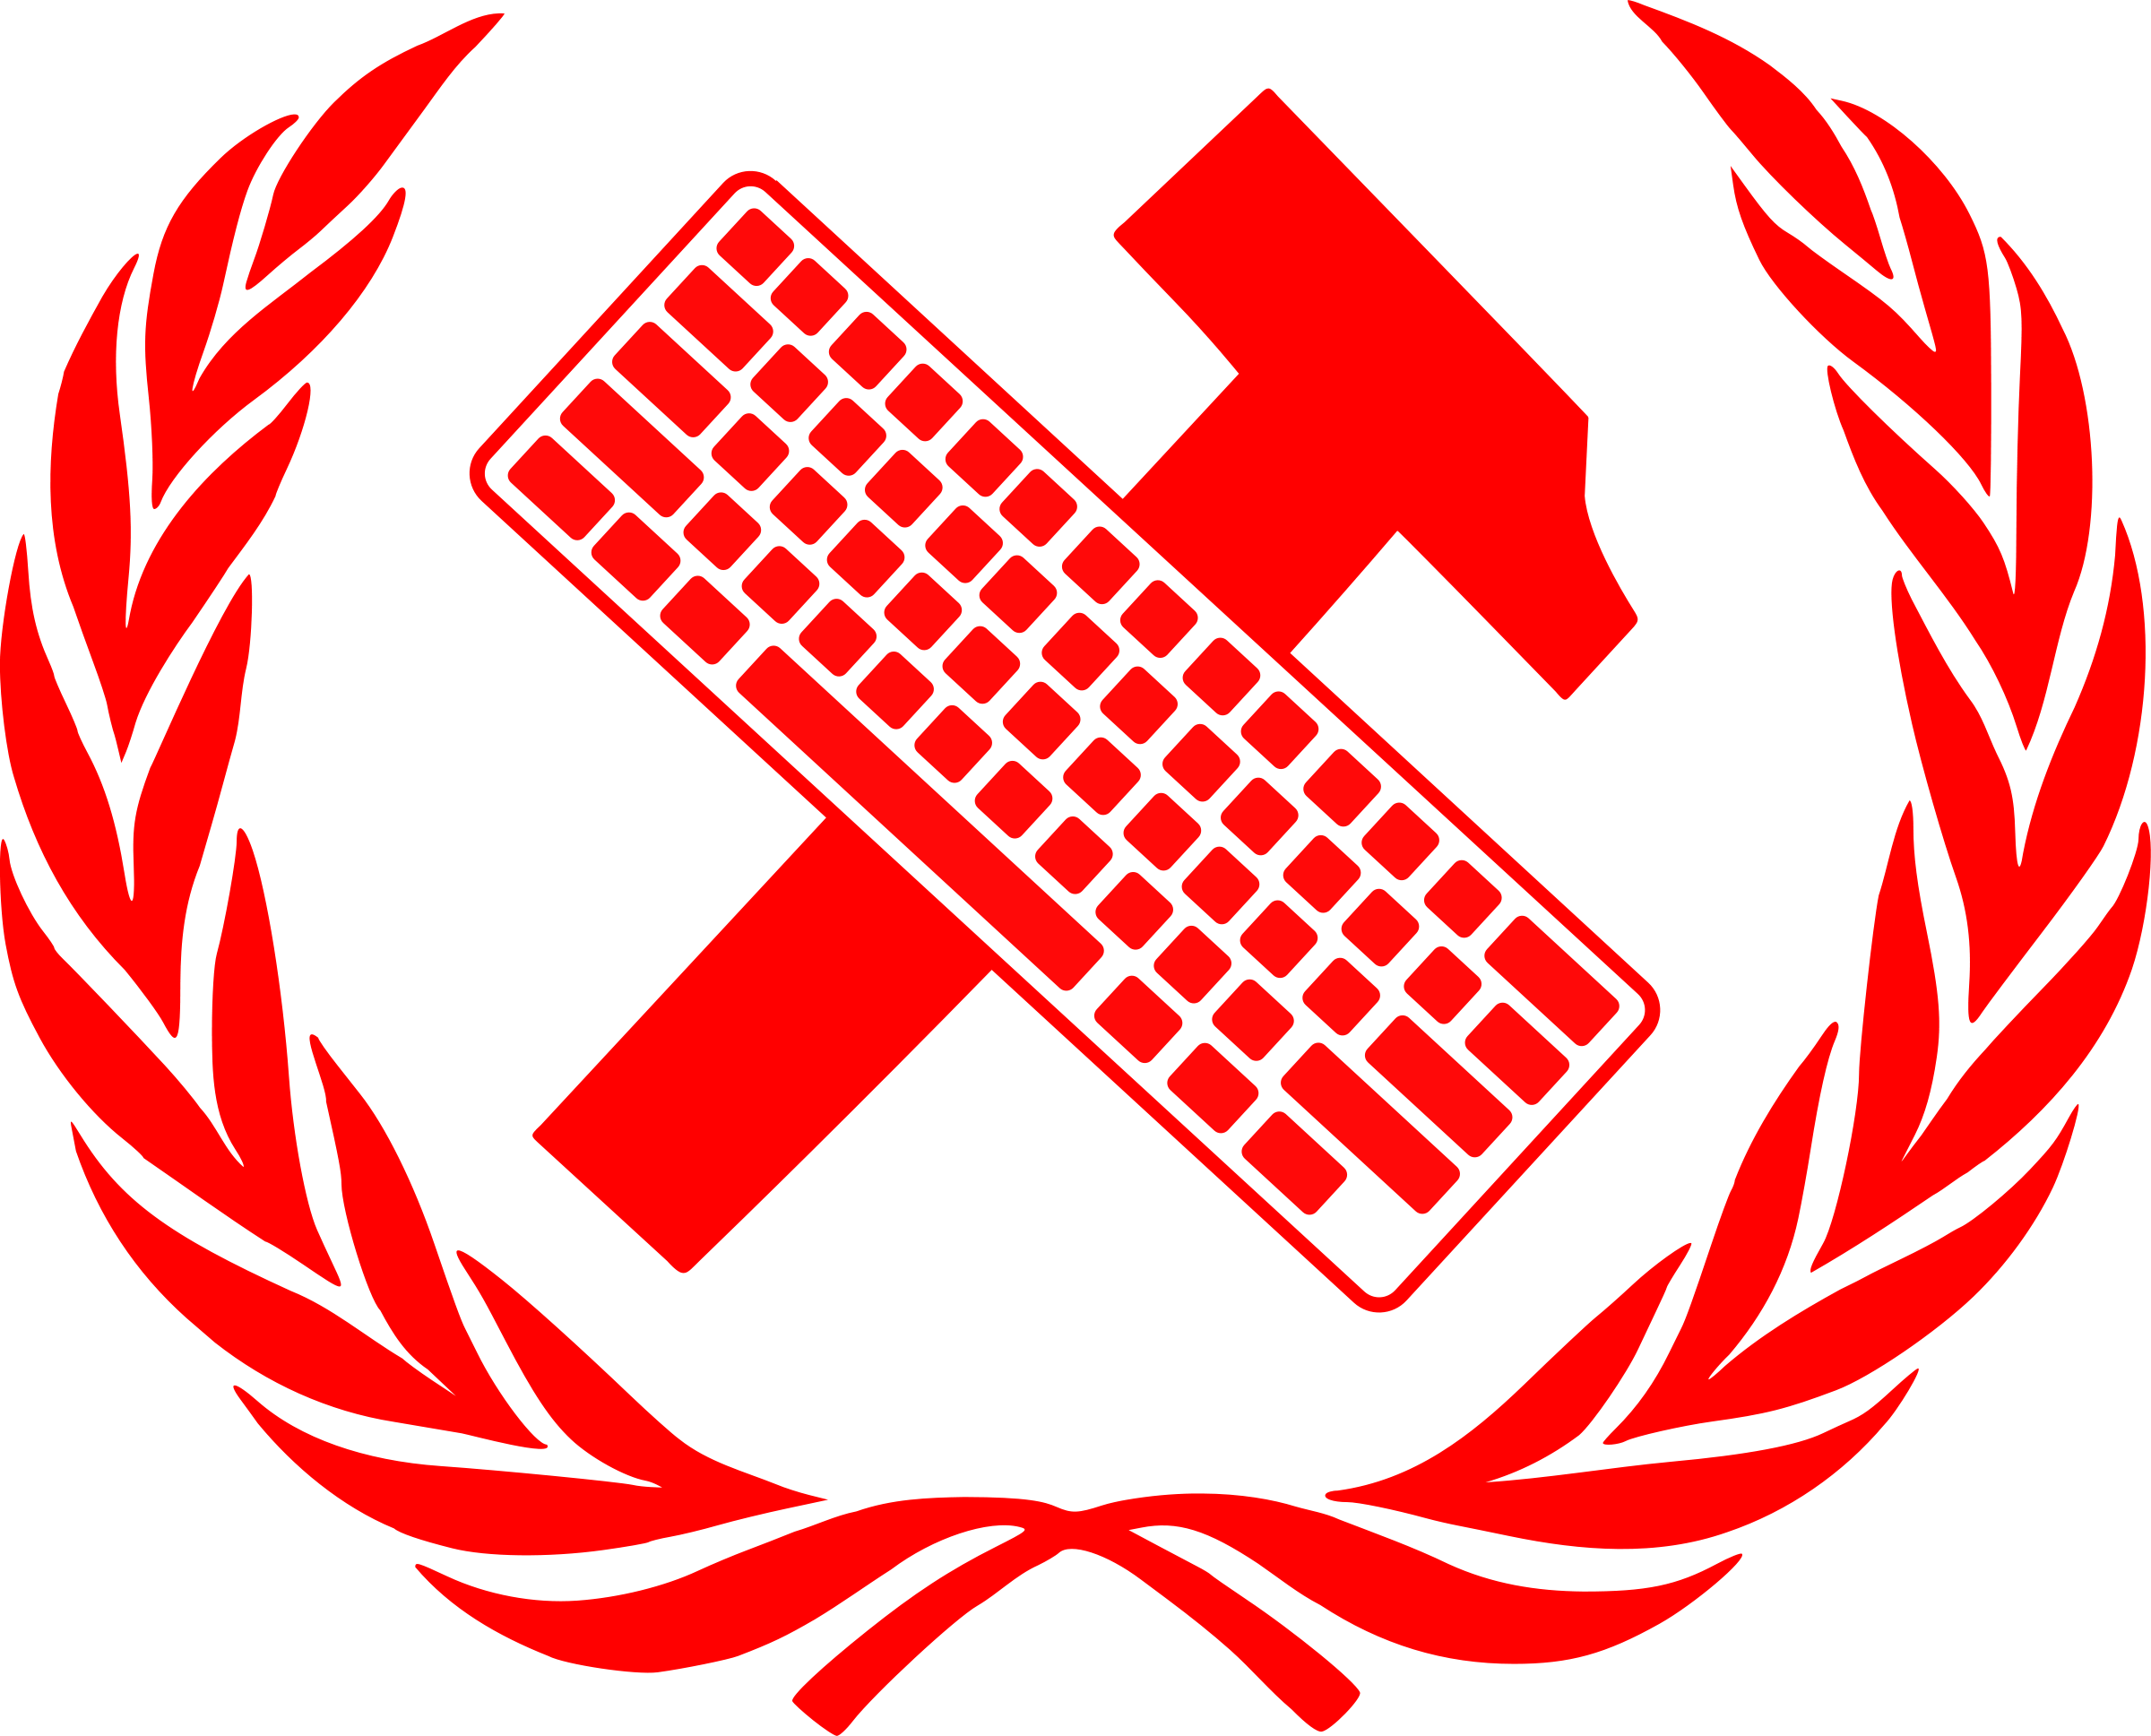 Clipart - workers unite - hammer and keyboard in laurel wreath